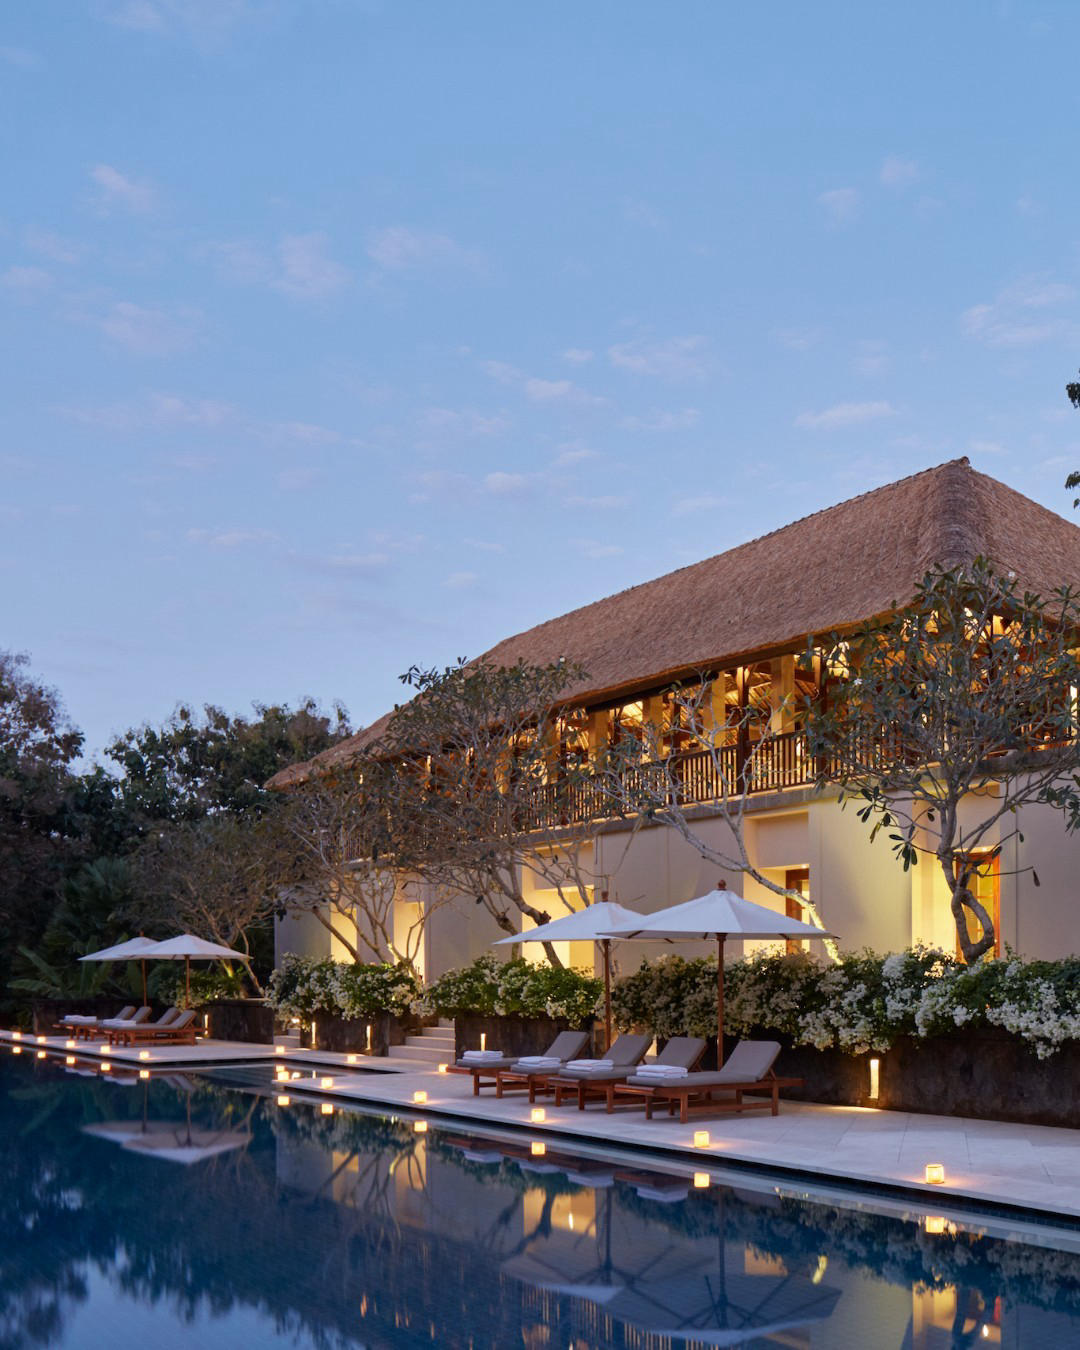 Aman Villas at Nusa Dua - The approach of twilight suffuses the sky with purple and orange, setting